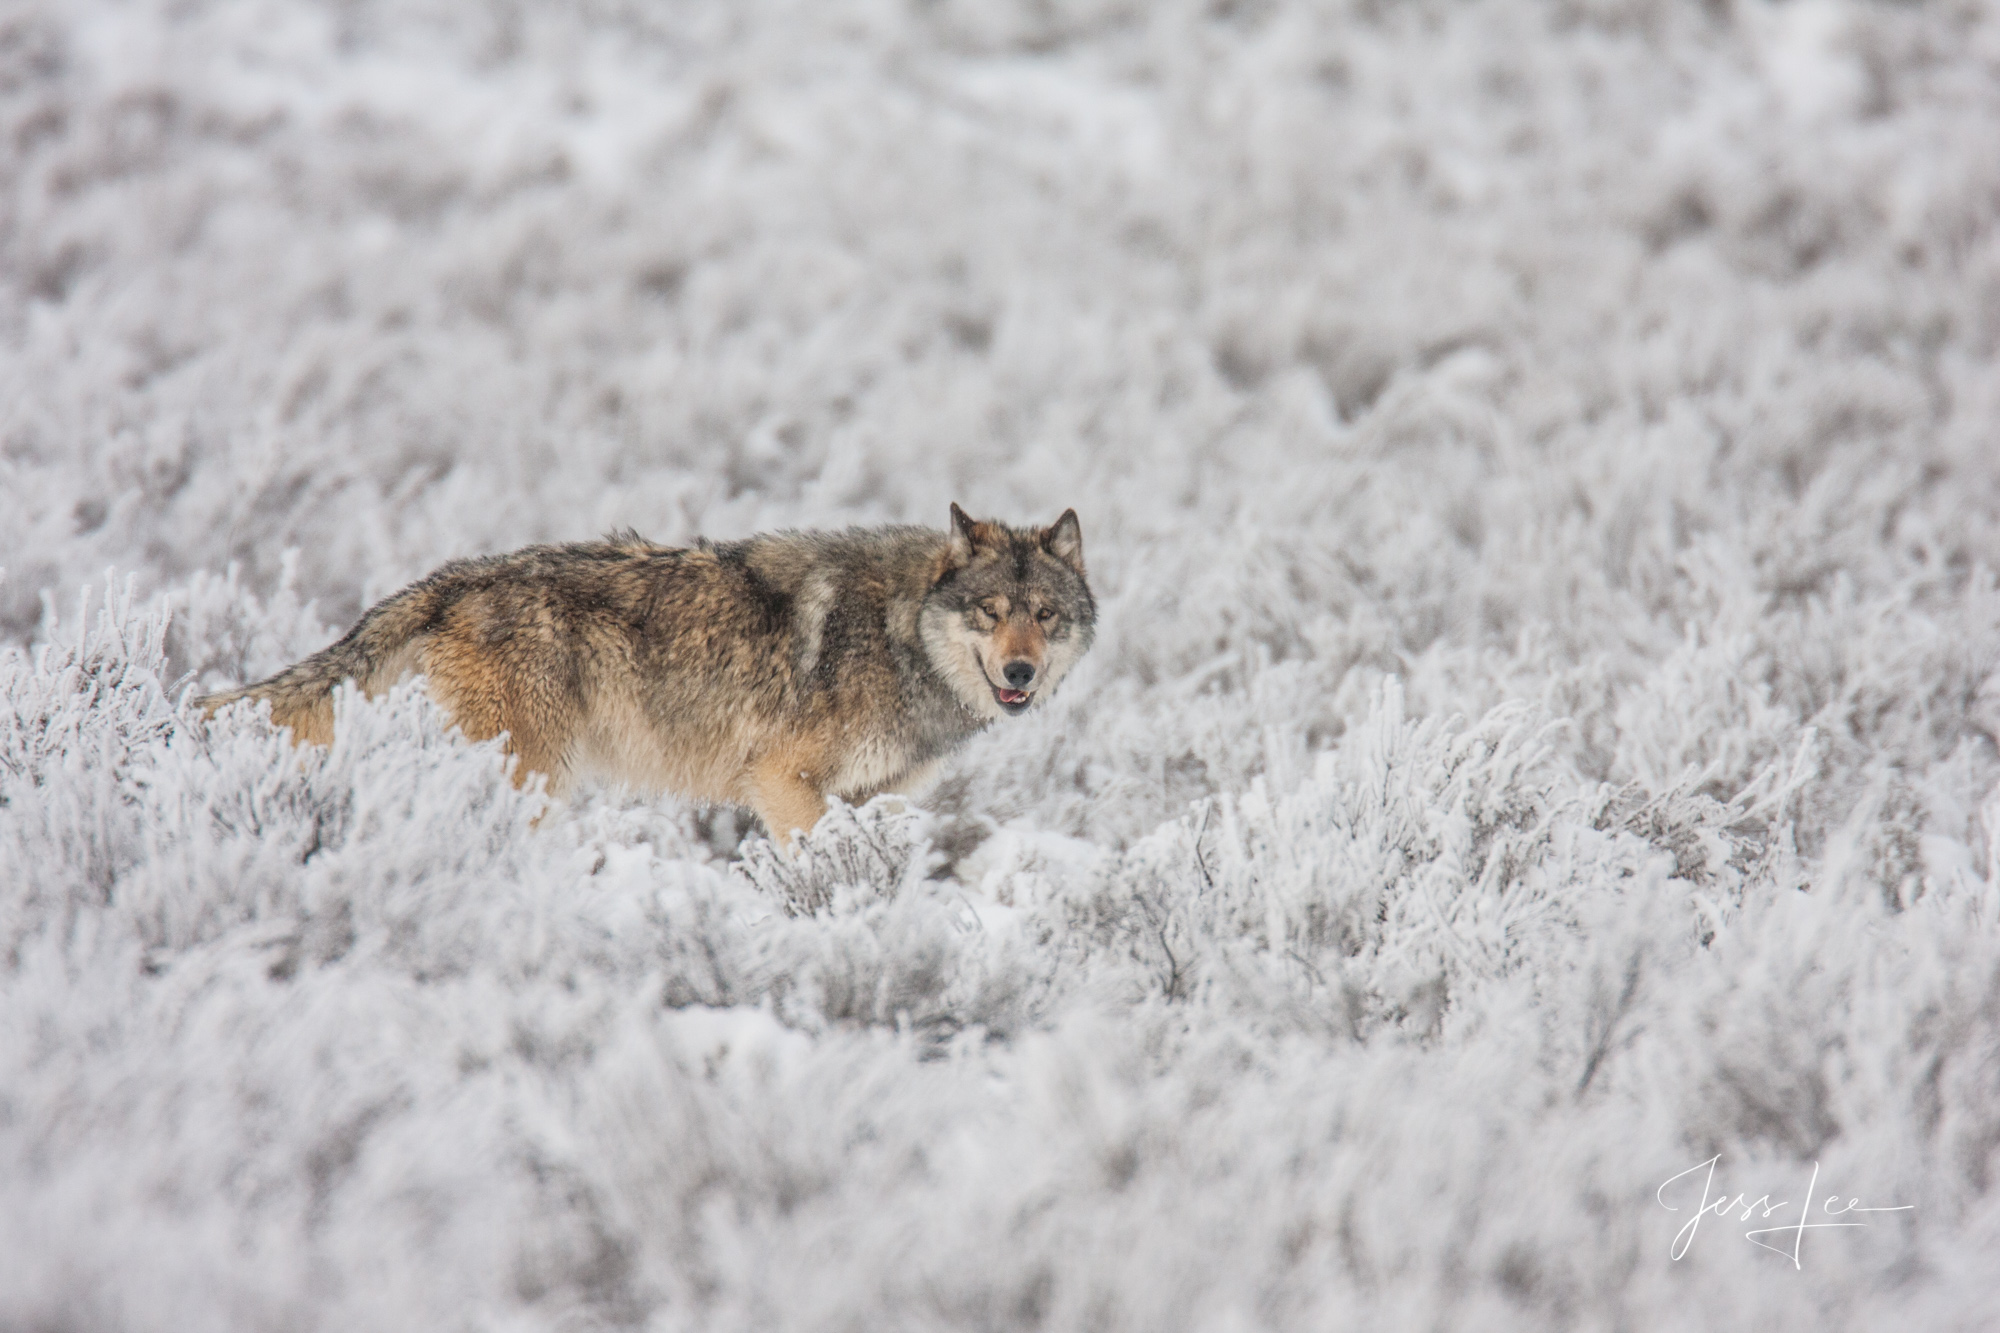 Yellowstone Frost covered Wolf in the Wild. Exclusive limited edition photo of 200 prints by Jess Lee